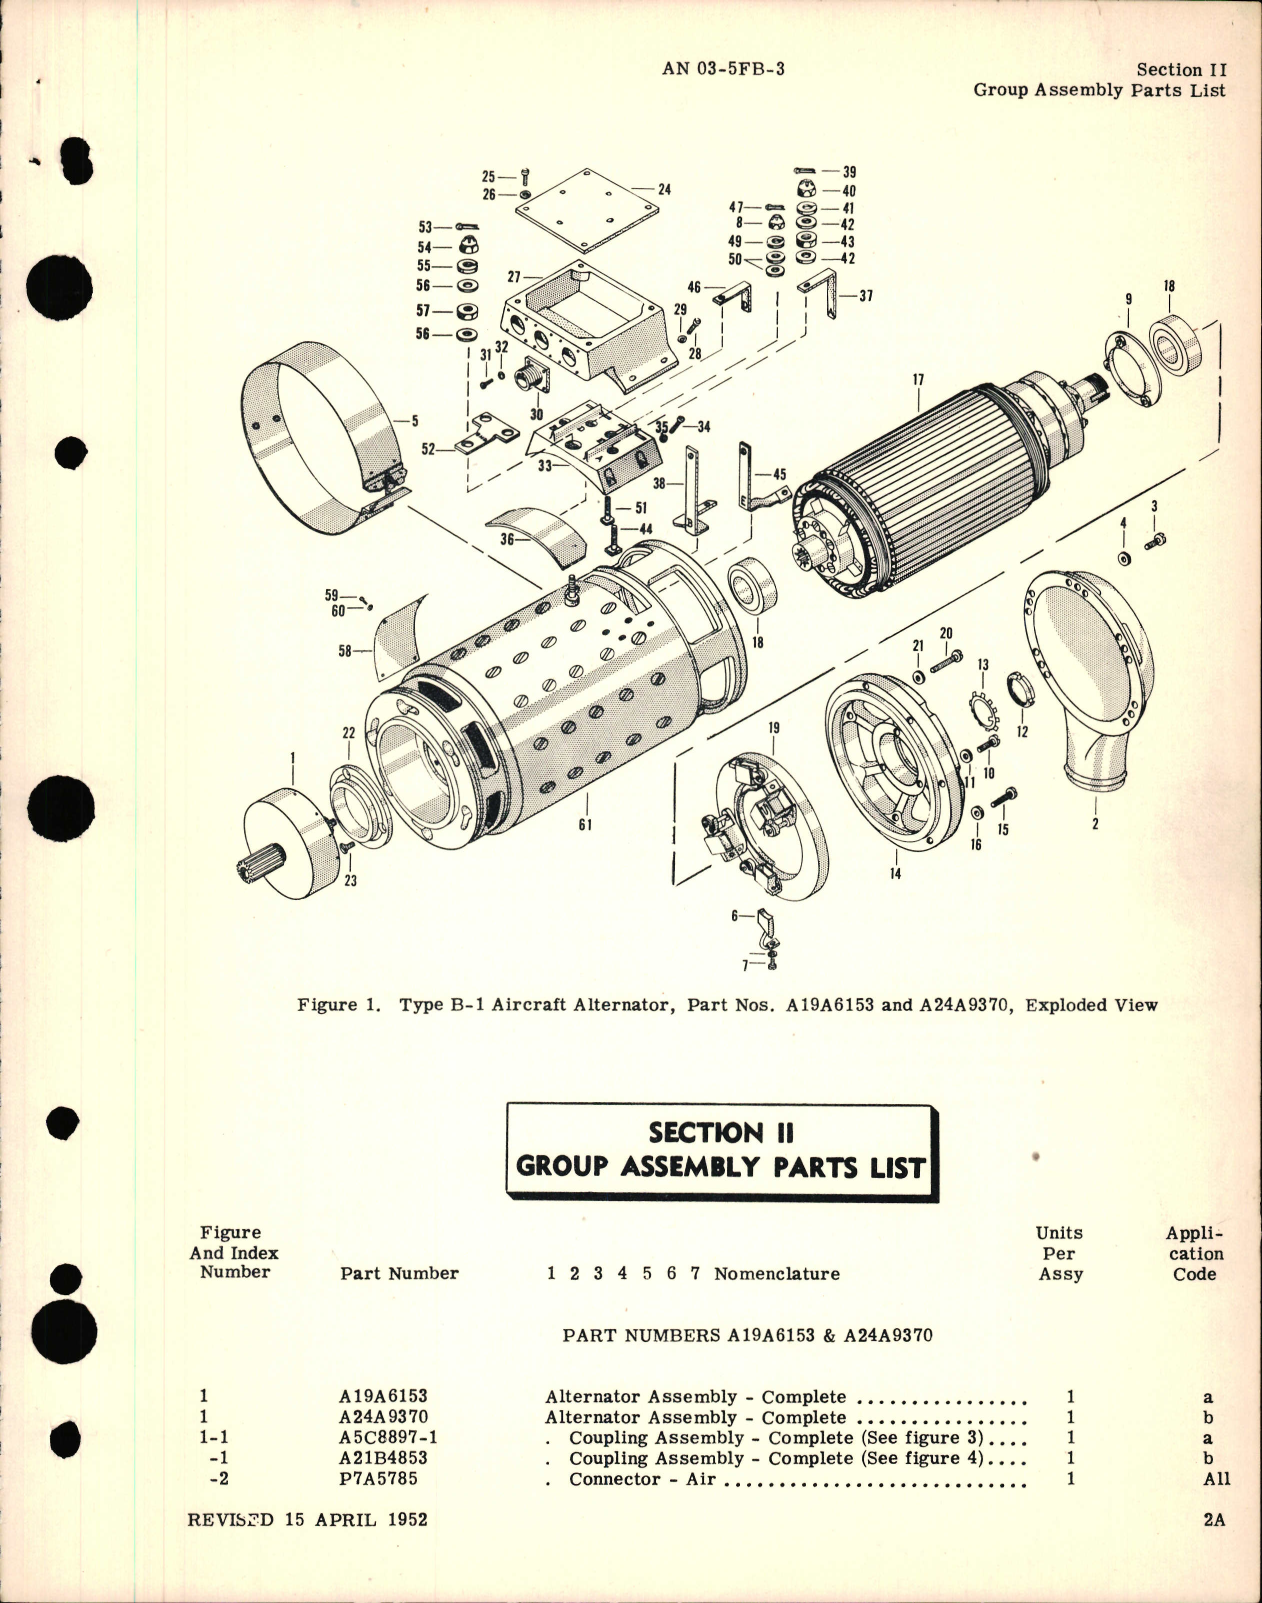 Sample page 5 from AirCorps Library document: Parts Catalog for Type B-1 Alternator